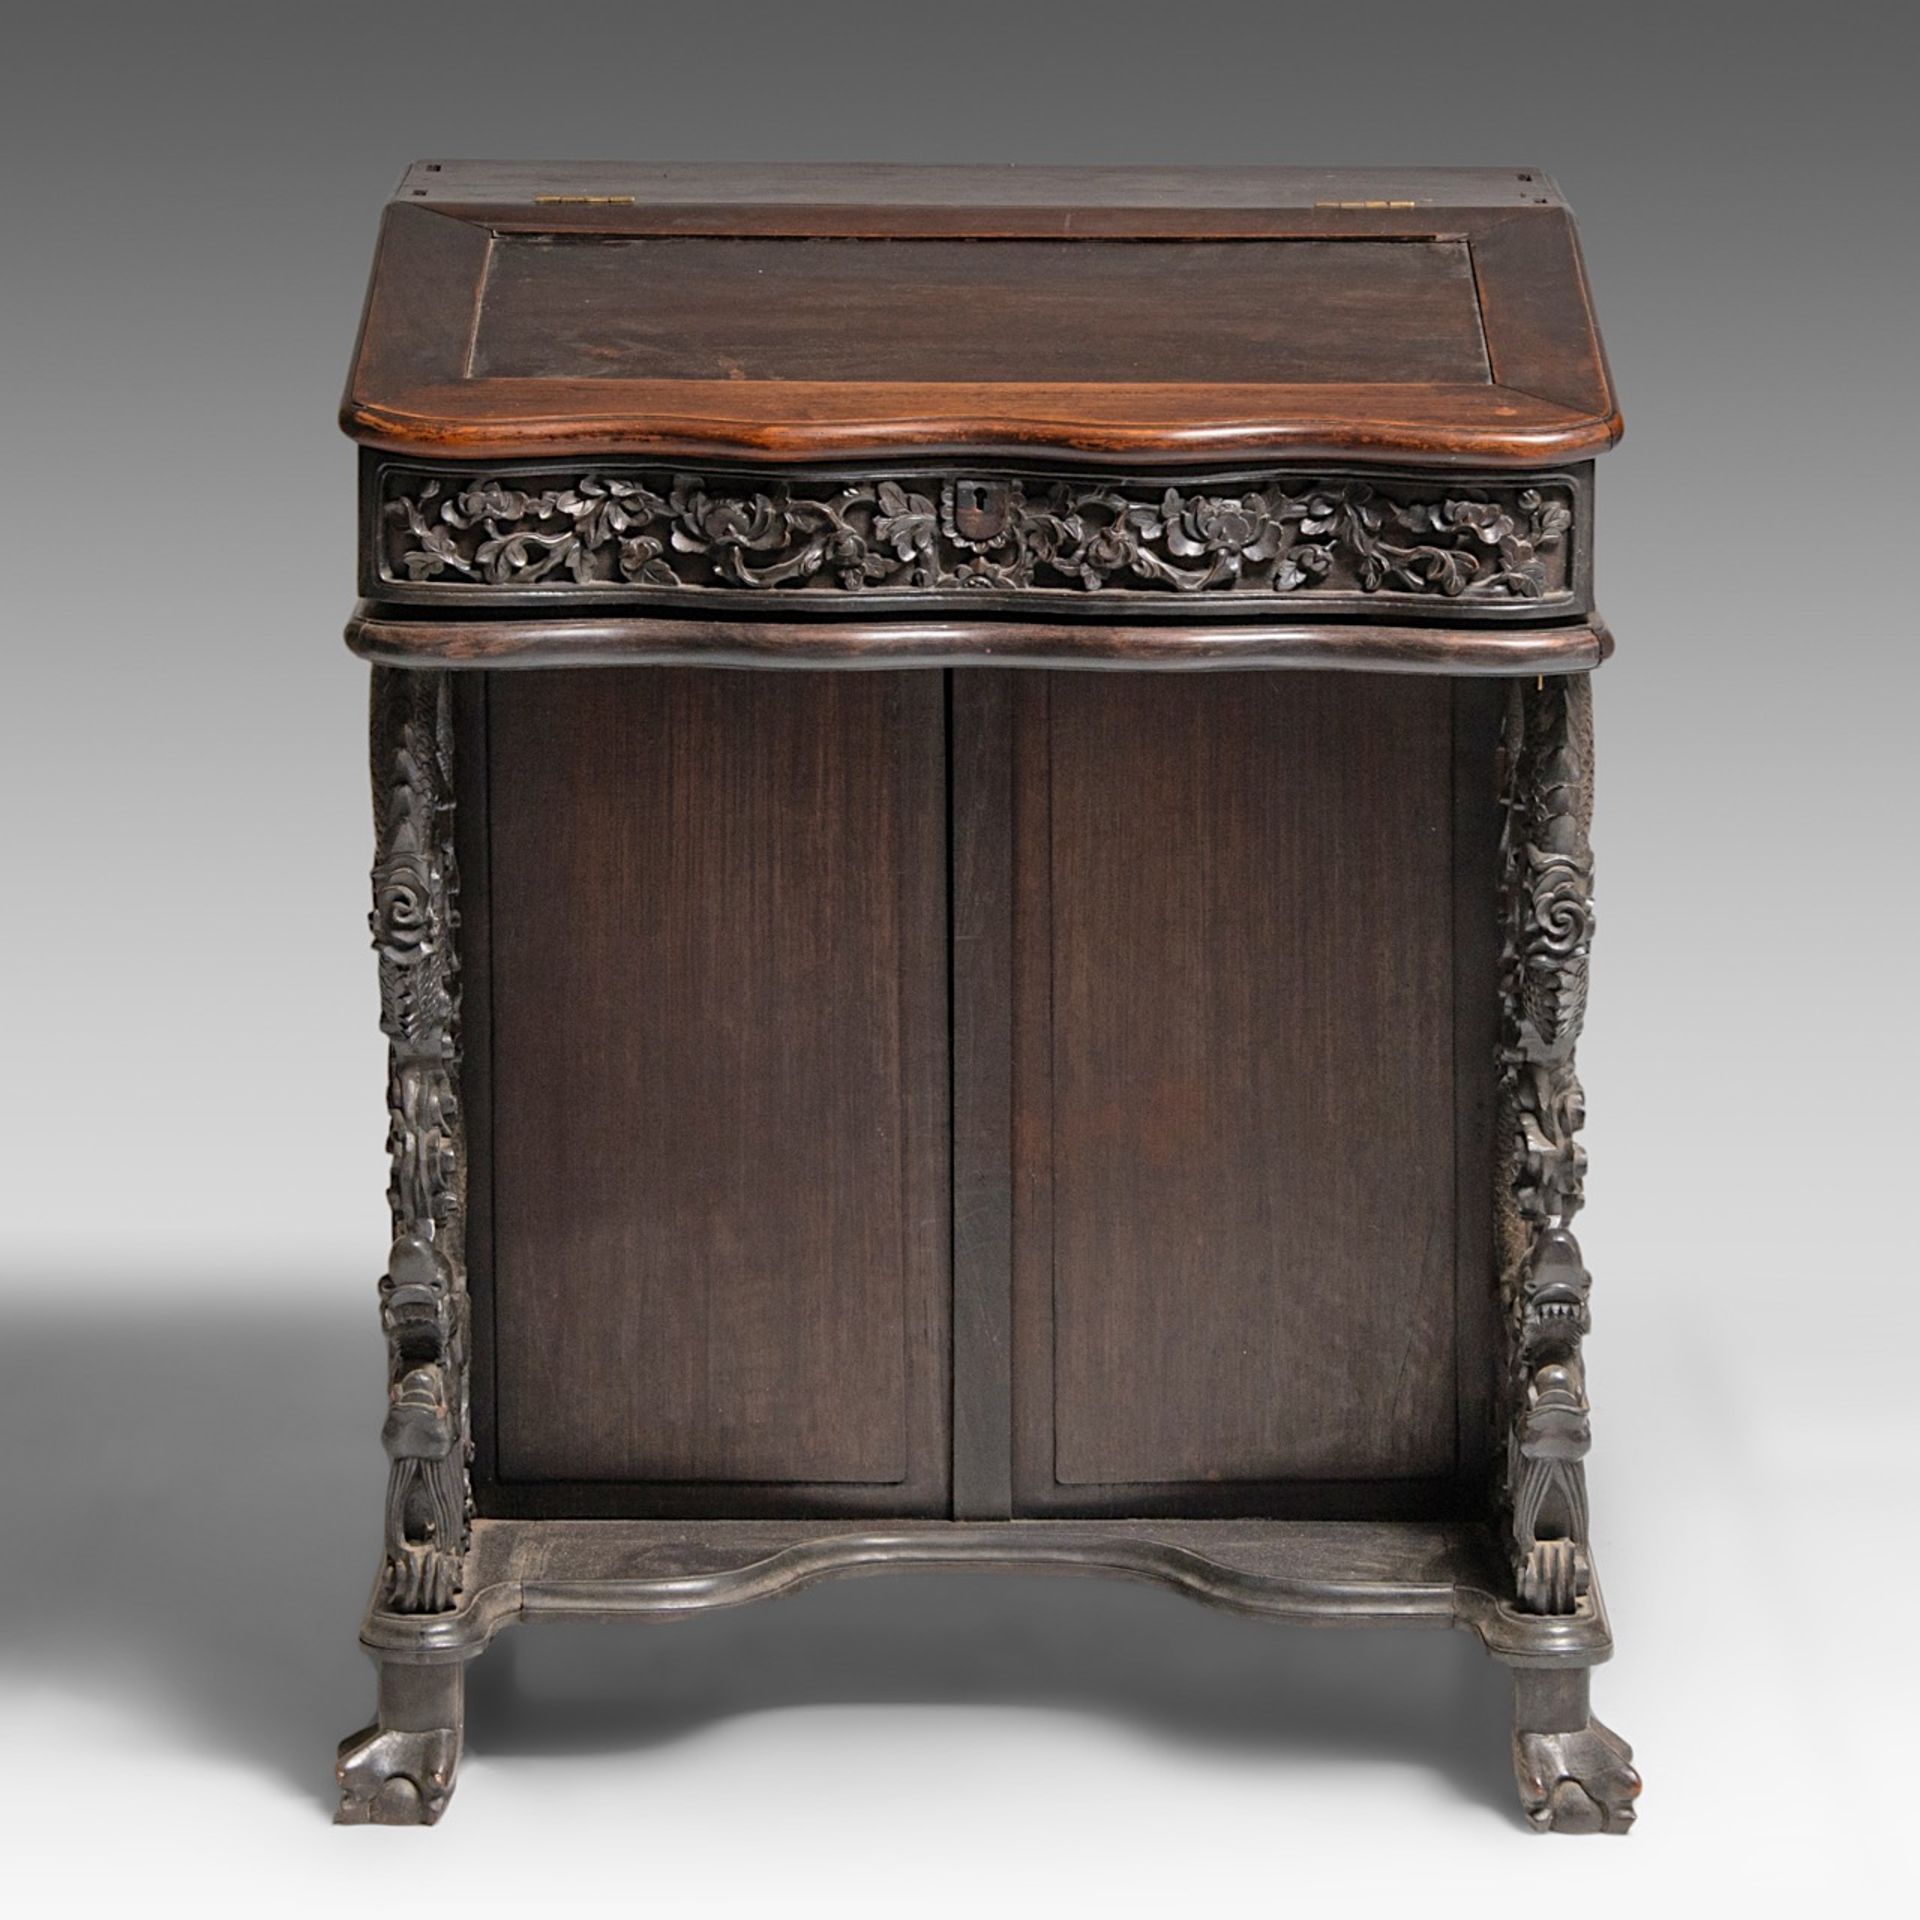 A compact South Chinese carved hardwood writing desk, 19thC, H 83 - W 66 - D 62 cm - Bild 2 aus 10